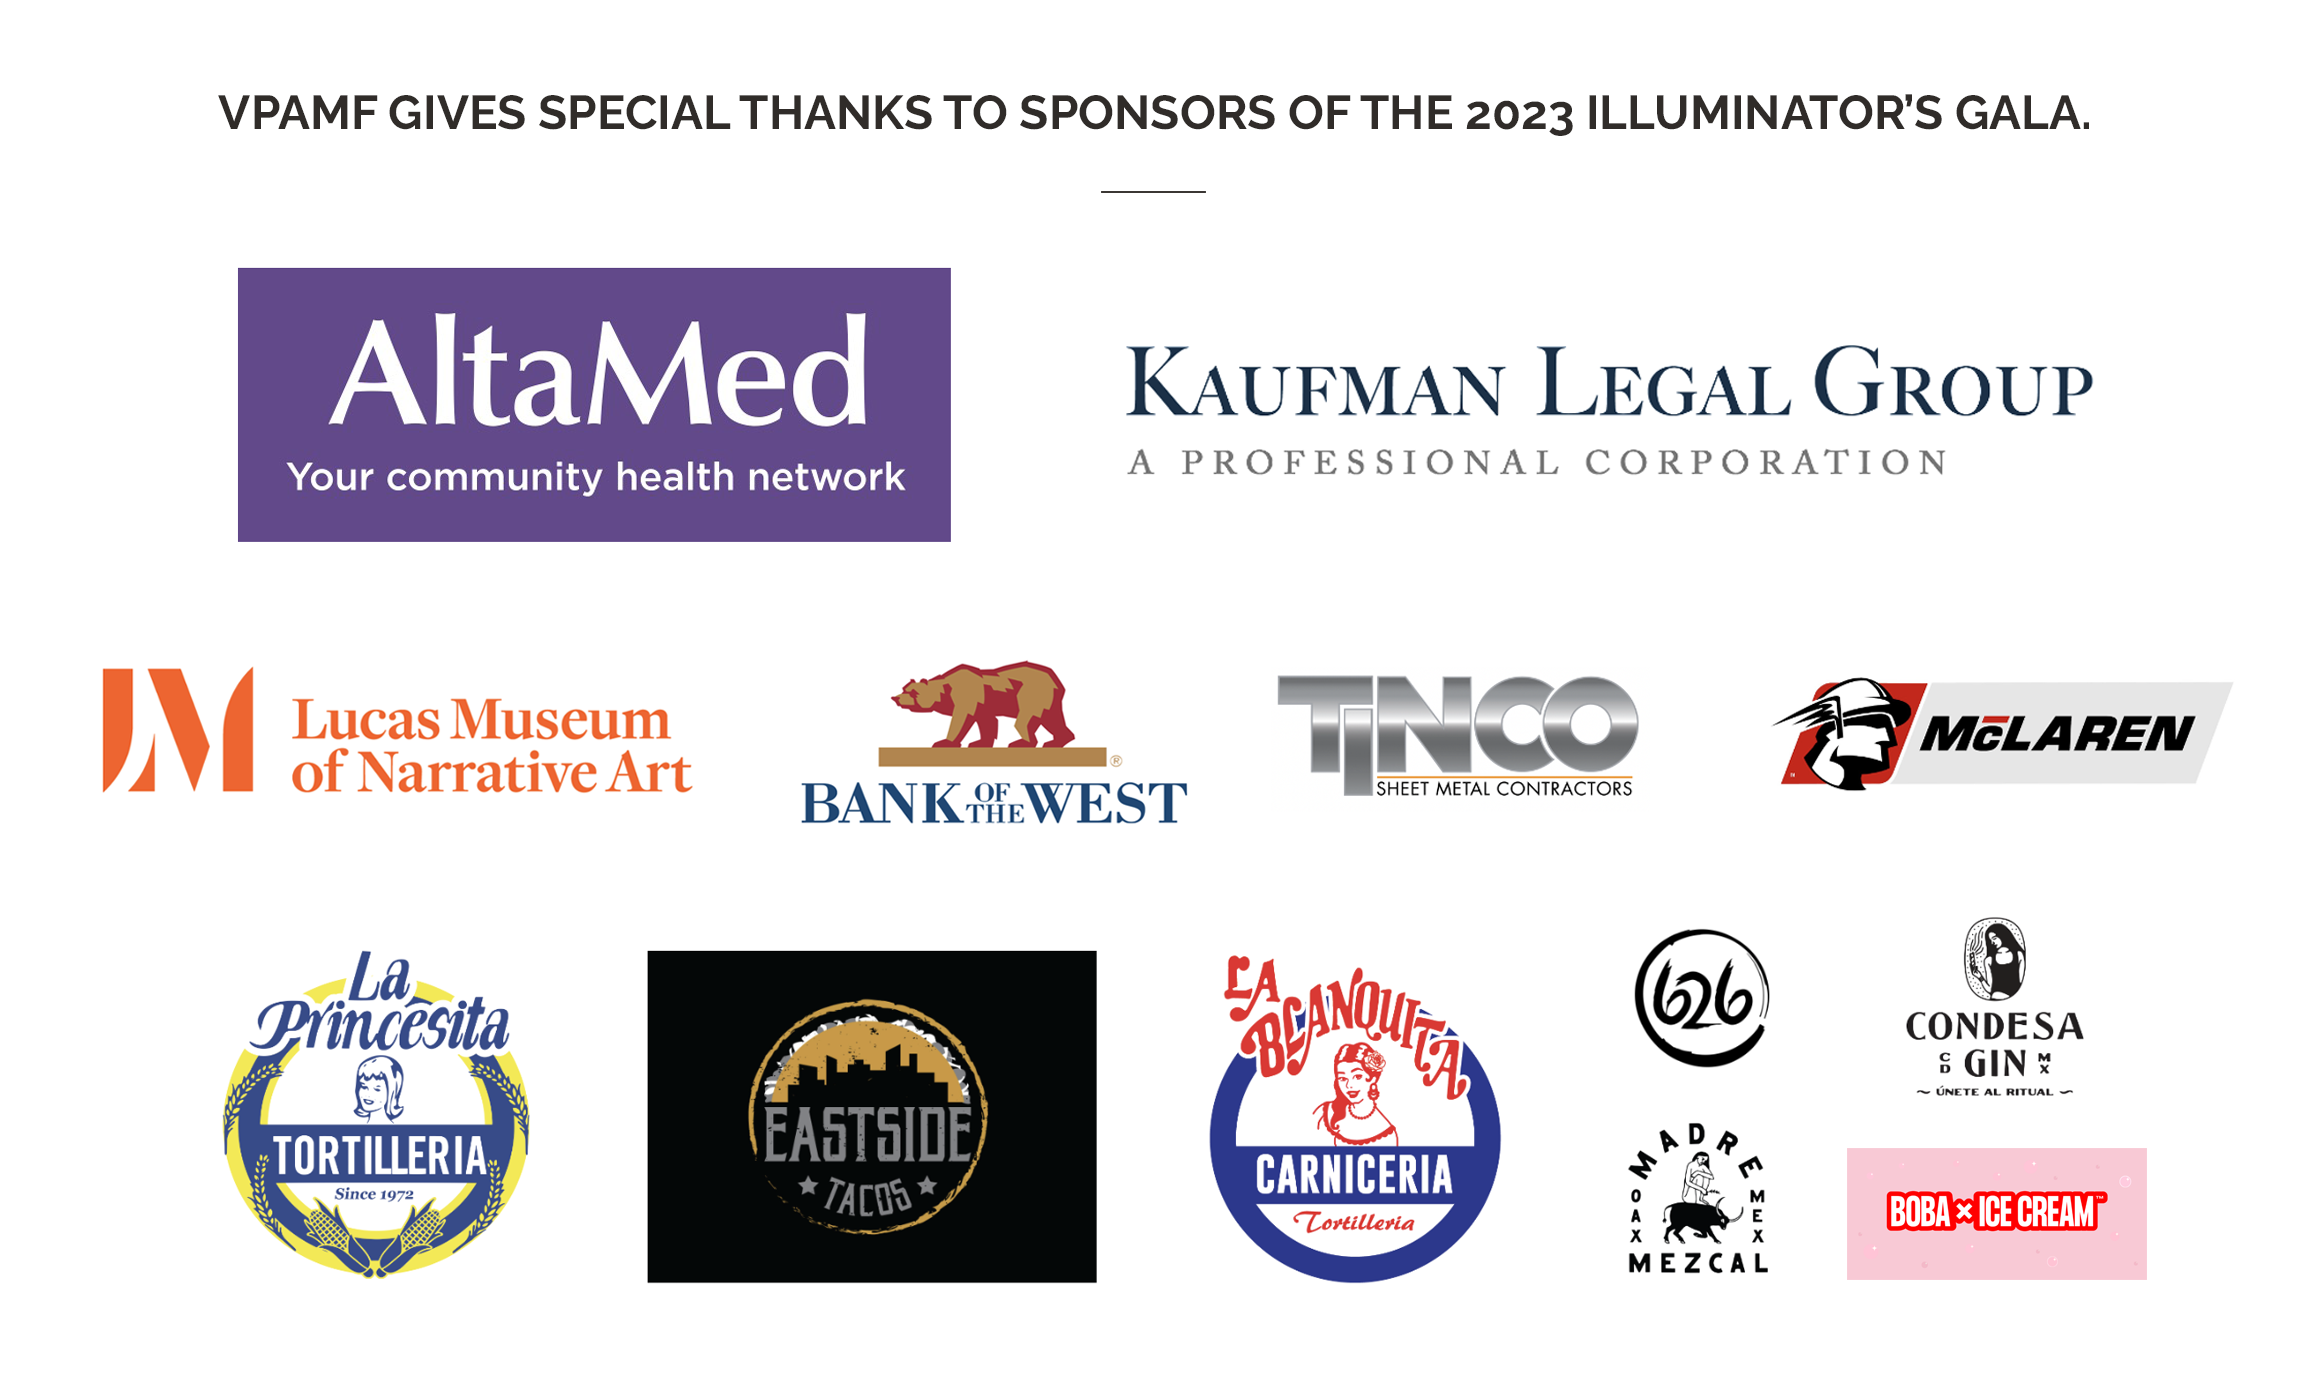 VPAMF GIVES SPECIAL THANKS TO SPONSORS OF THE 2023 ILLUMINATOR’S GALA.
